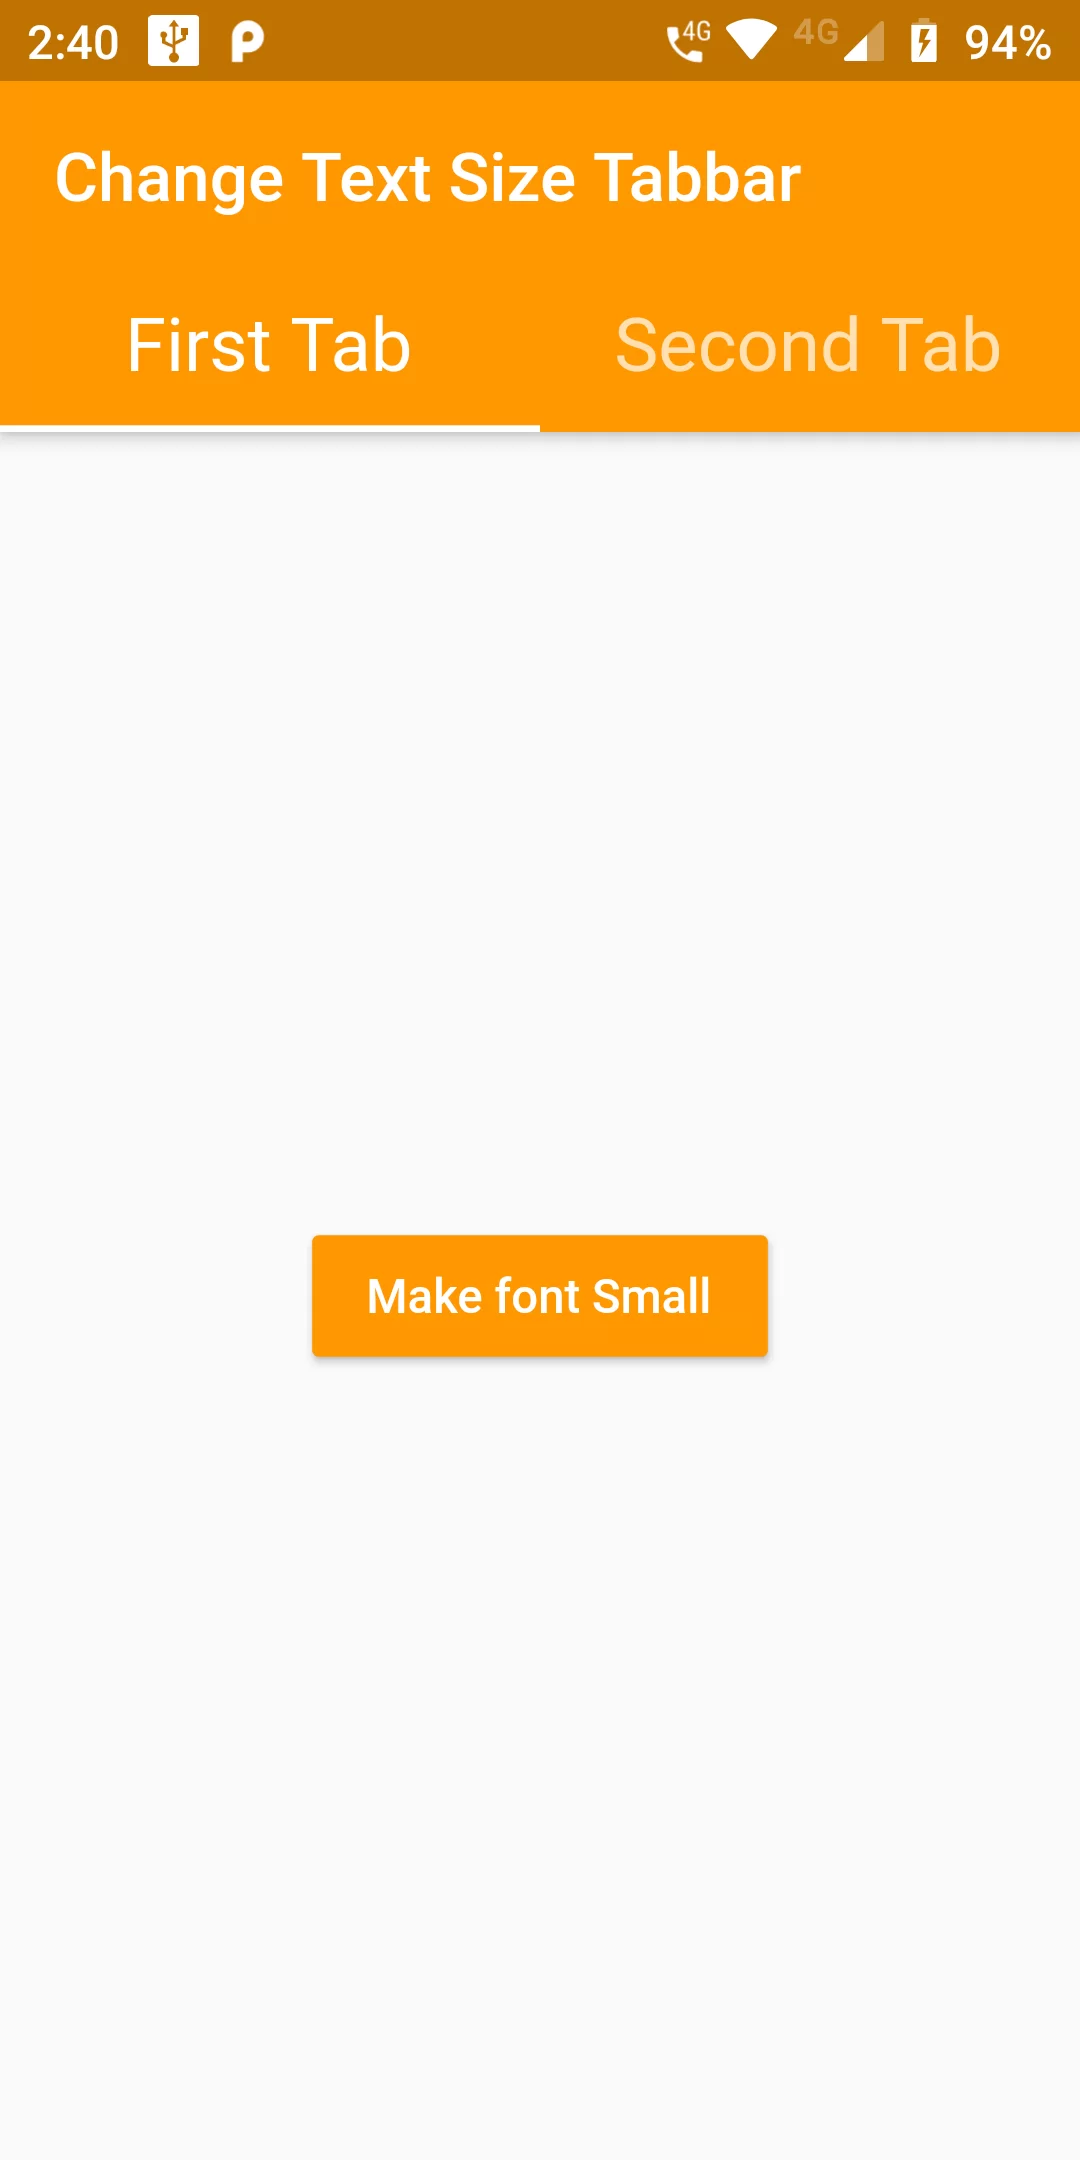 How To Change Text Size Tabbar Using Flutter Android App